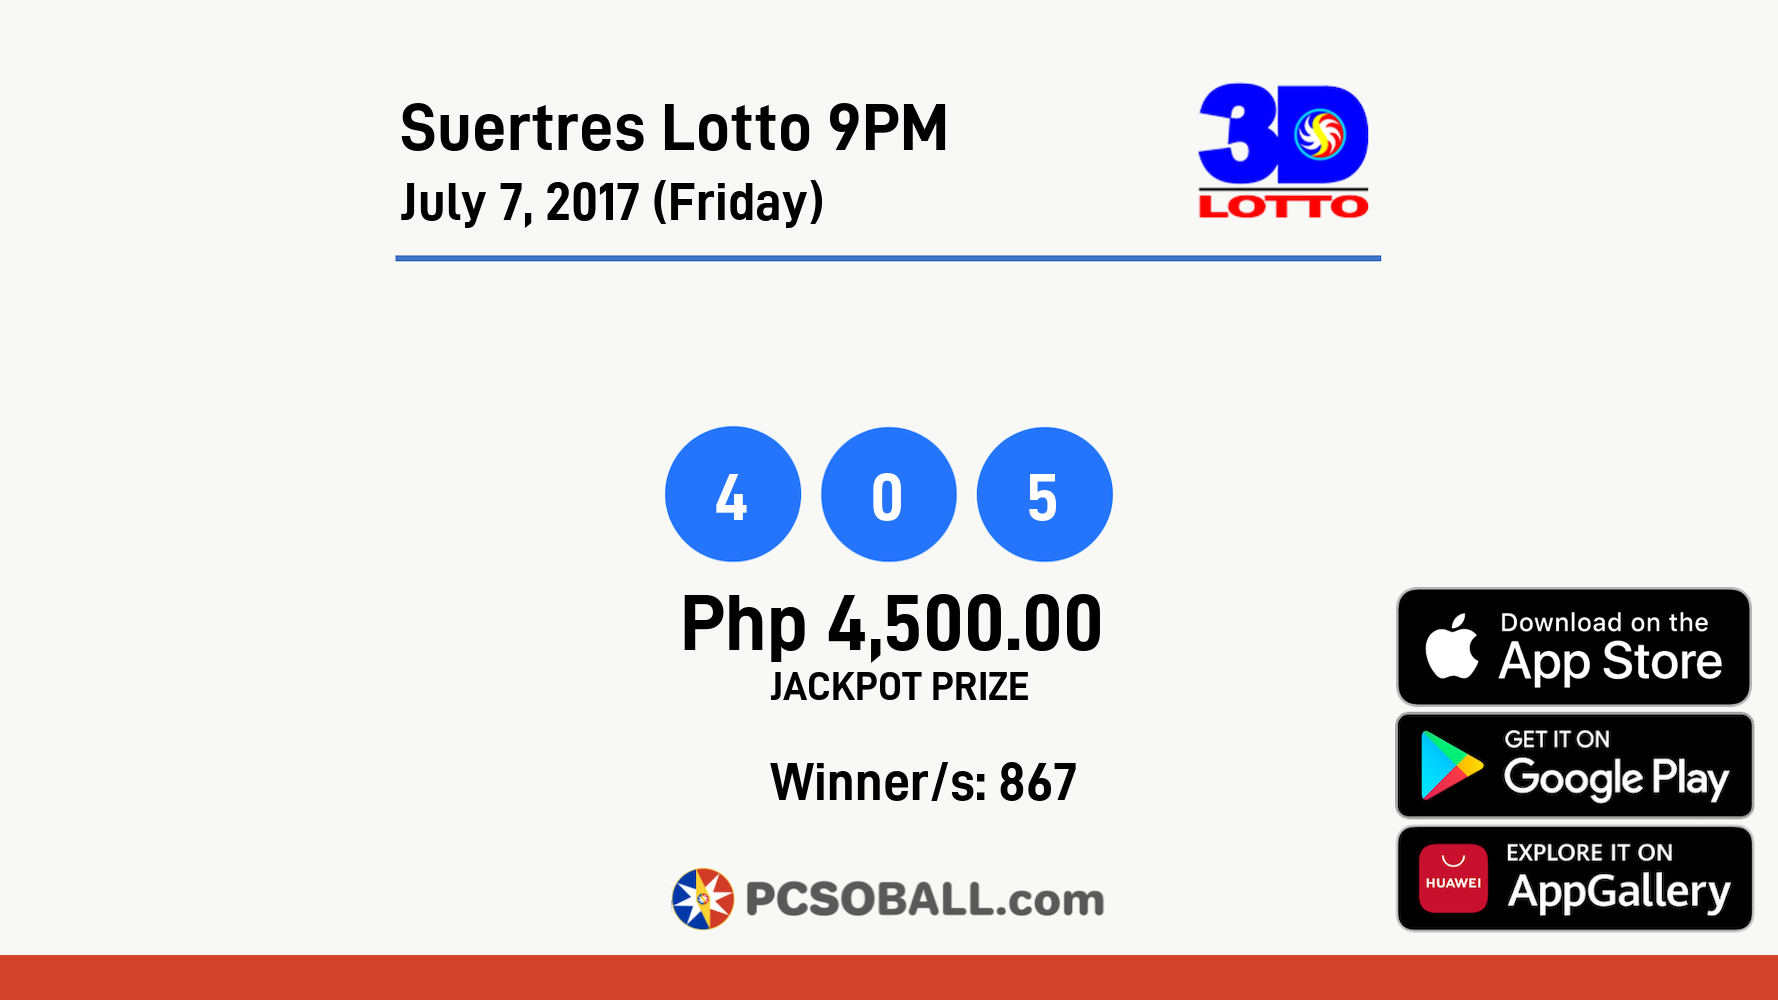 Suertres Lotto 9PM July 7, 2017 (Friday) Result